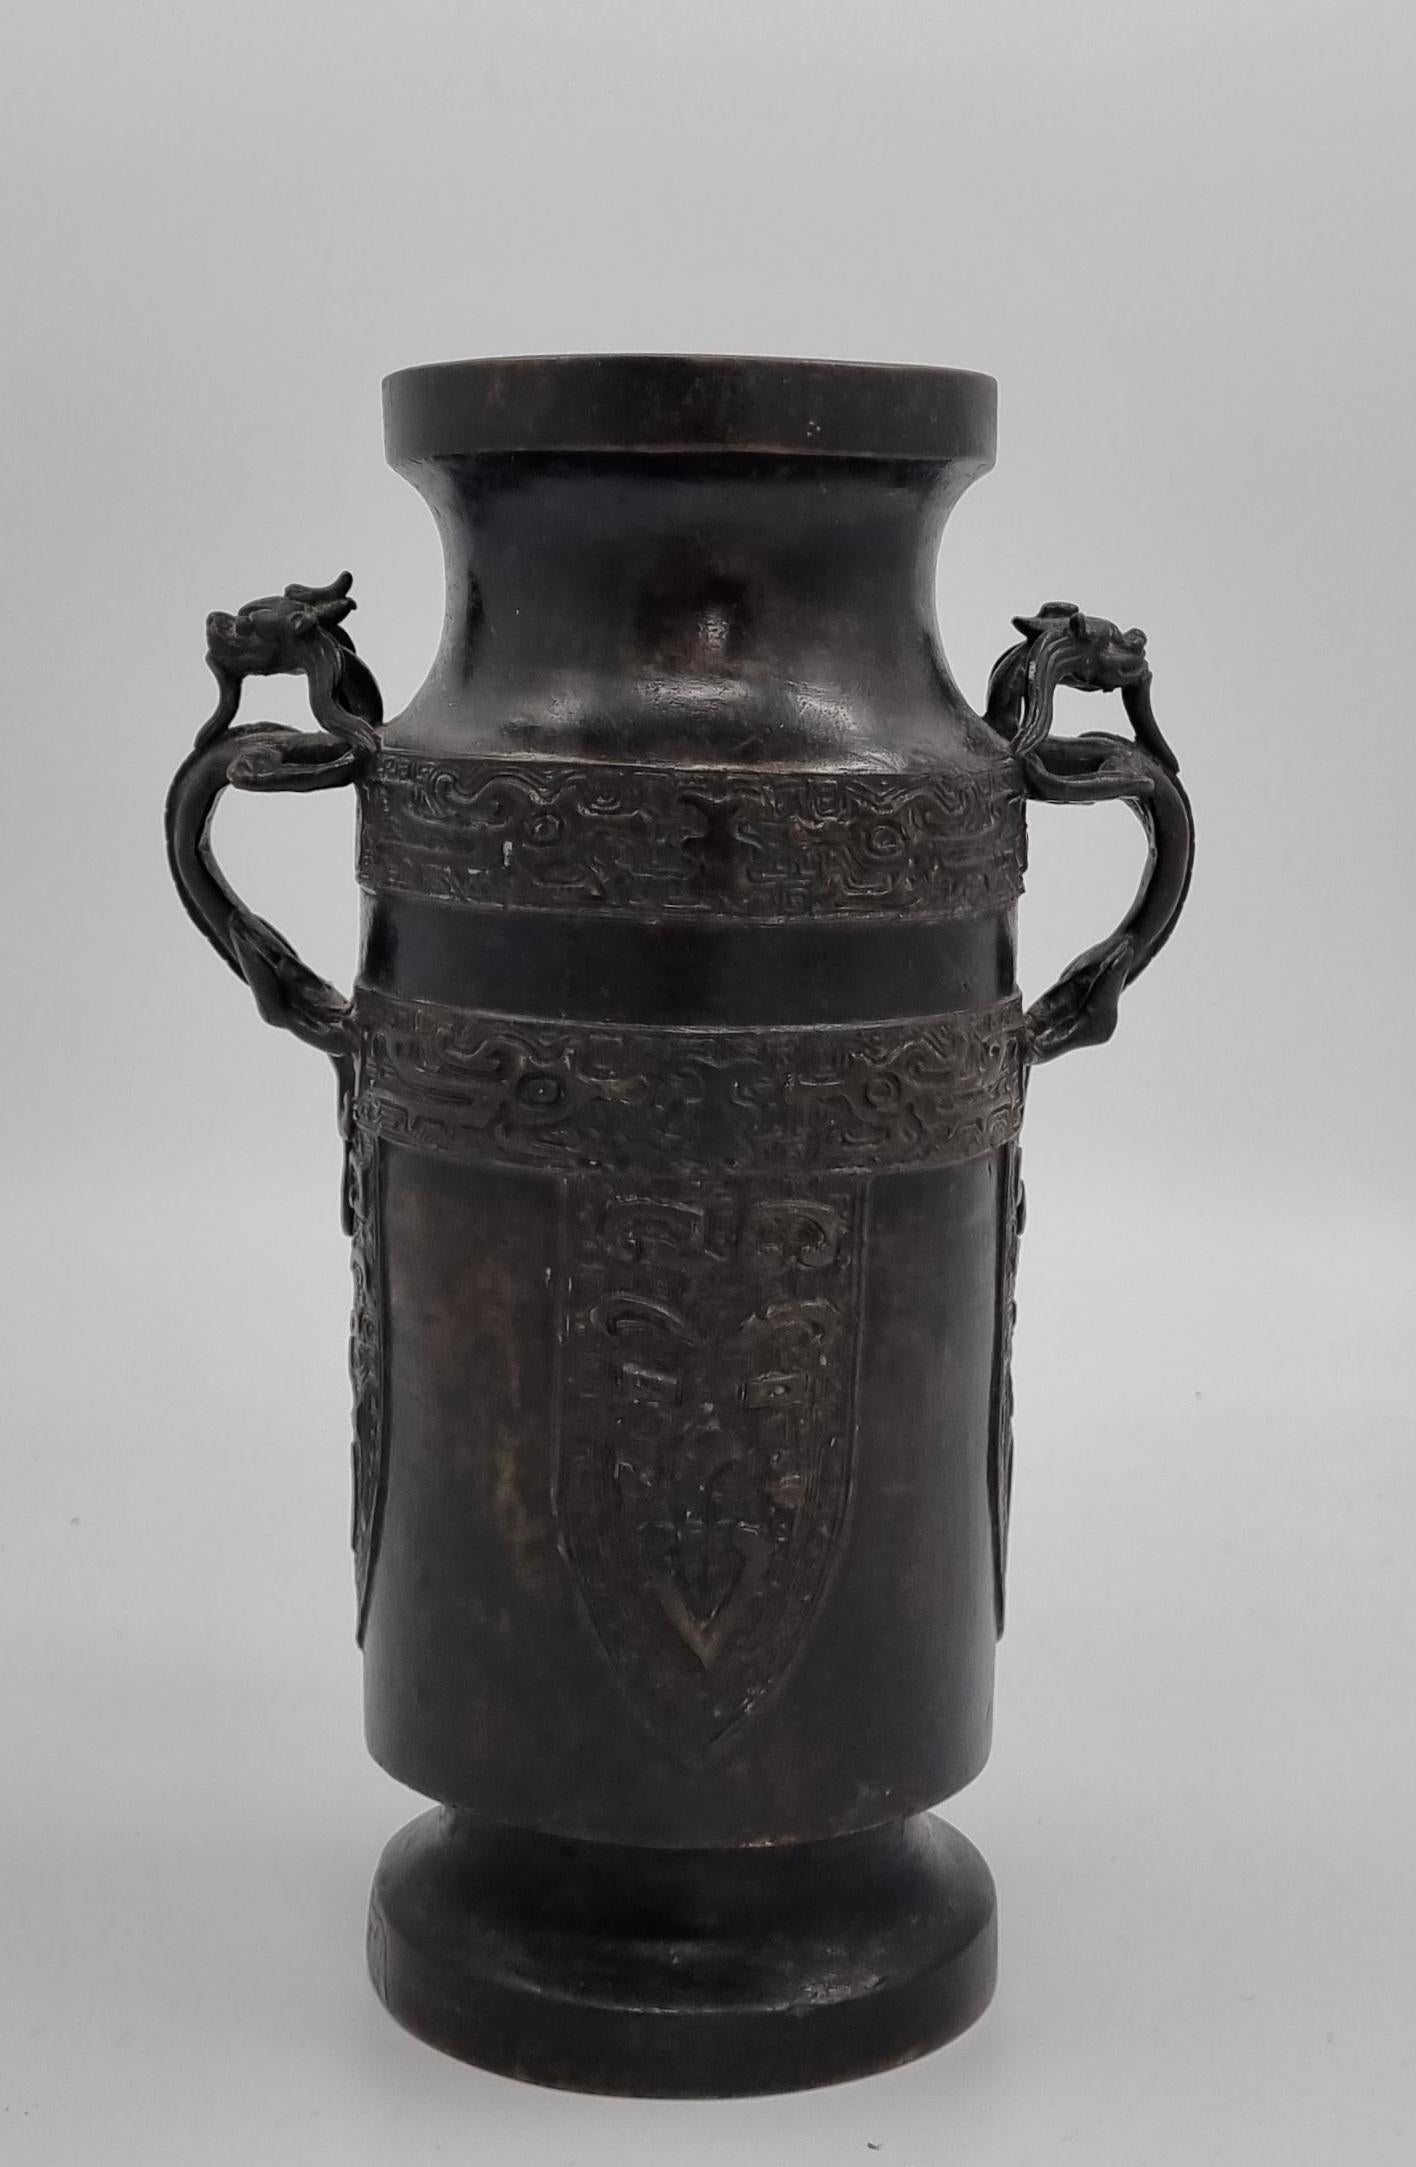 Chinese Ming dynasty bronze vase ( 1368- 1644 ) A genuine Ming vase dating from the early to middle of the ming dynasty. Archaistic decoration Taotie  mask design handles and Taotie  (